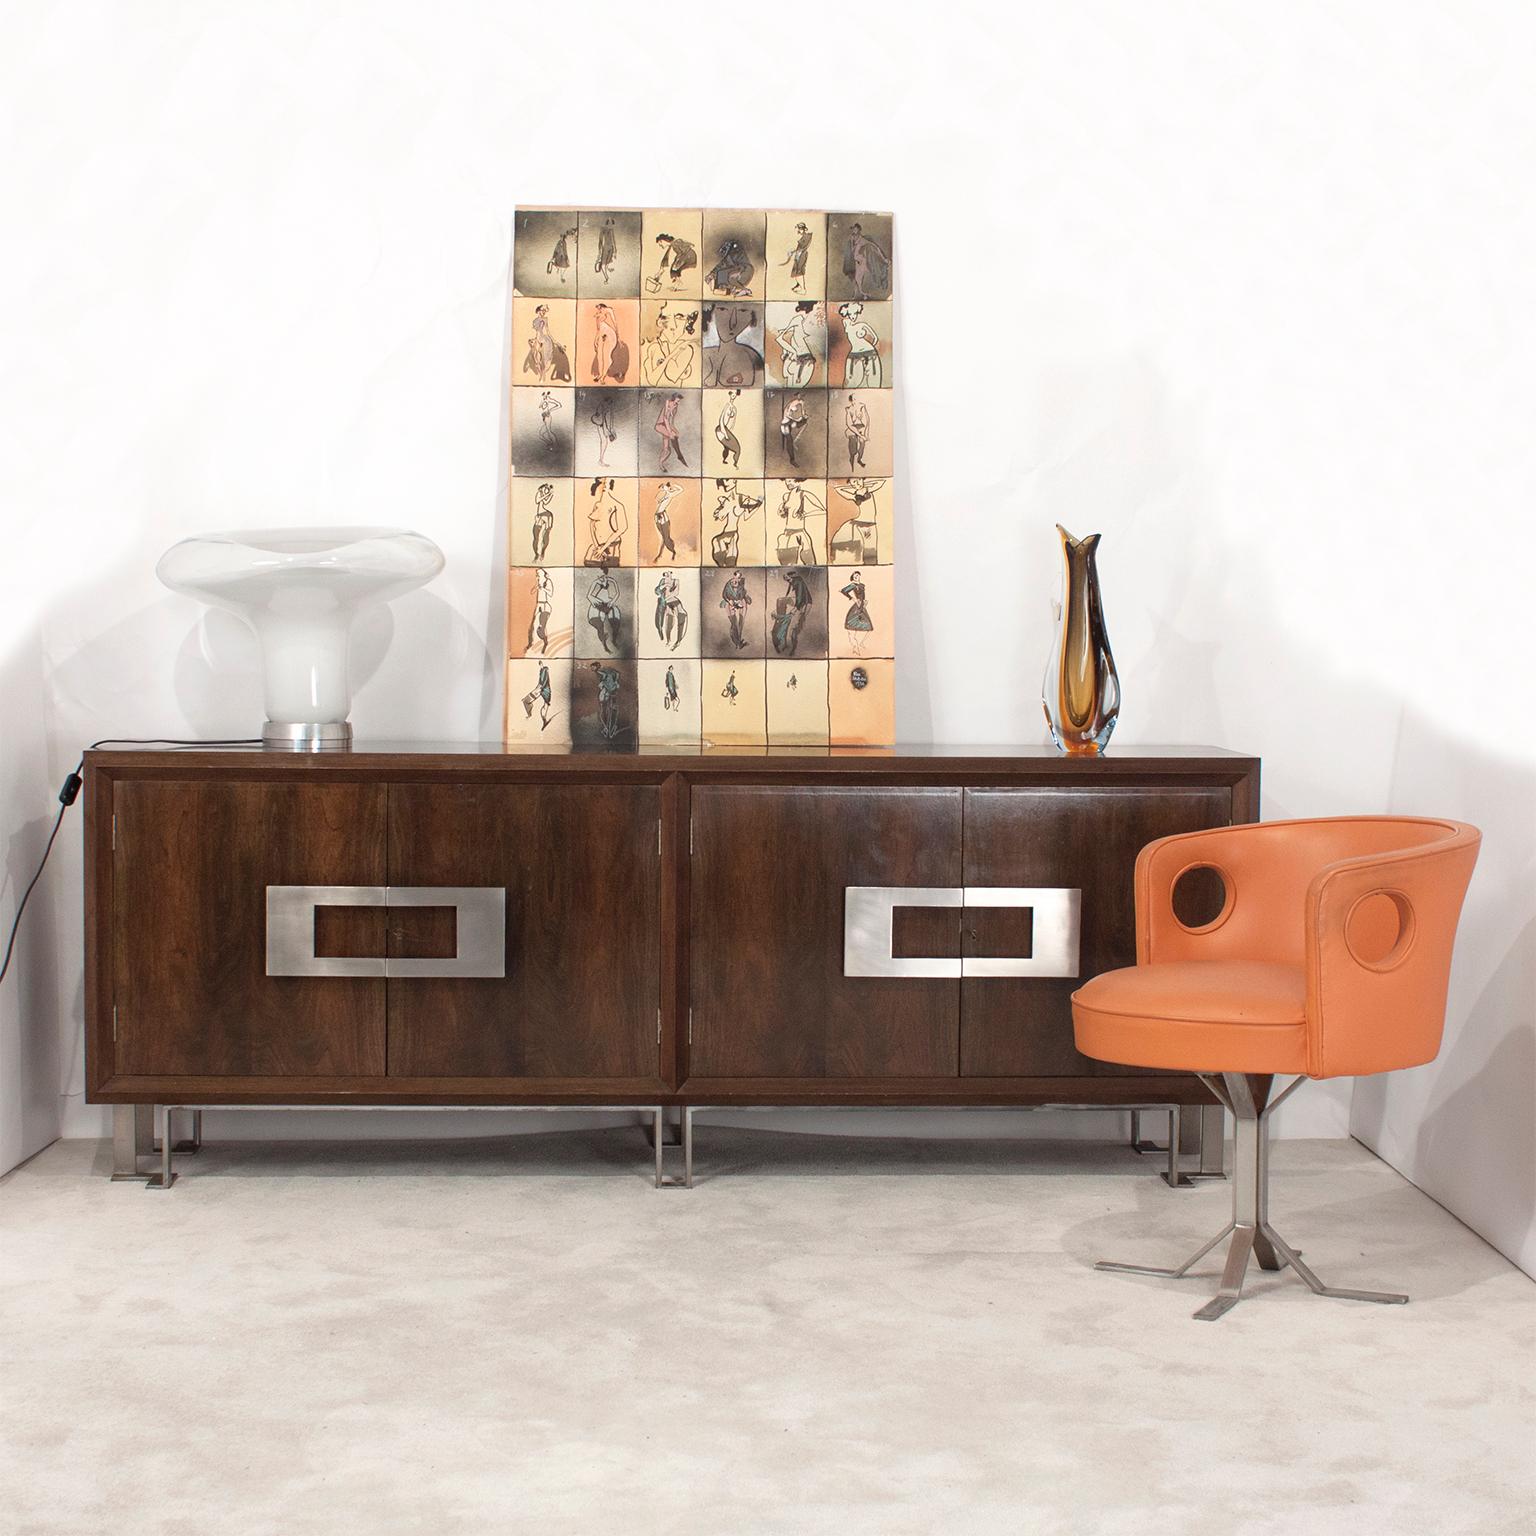 Sideboard designed by Jordi Vilanova in 1970s. Famous interior and furniture designer from Barcelona, 1960s-1970s.
Stained and French polished walnut veneer. Nickel-plated solid brass feet.
Good quality furniture, interior very well